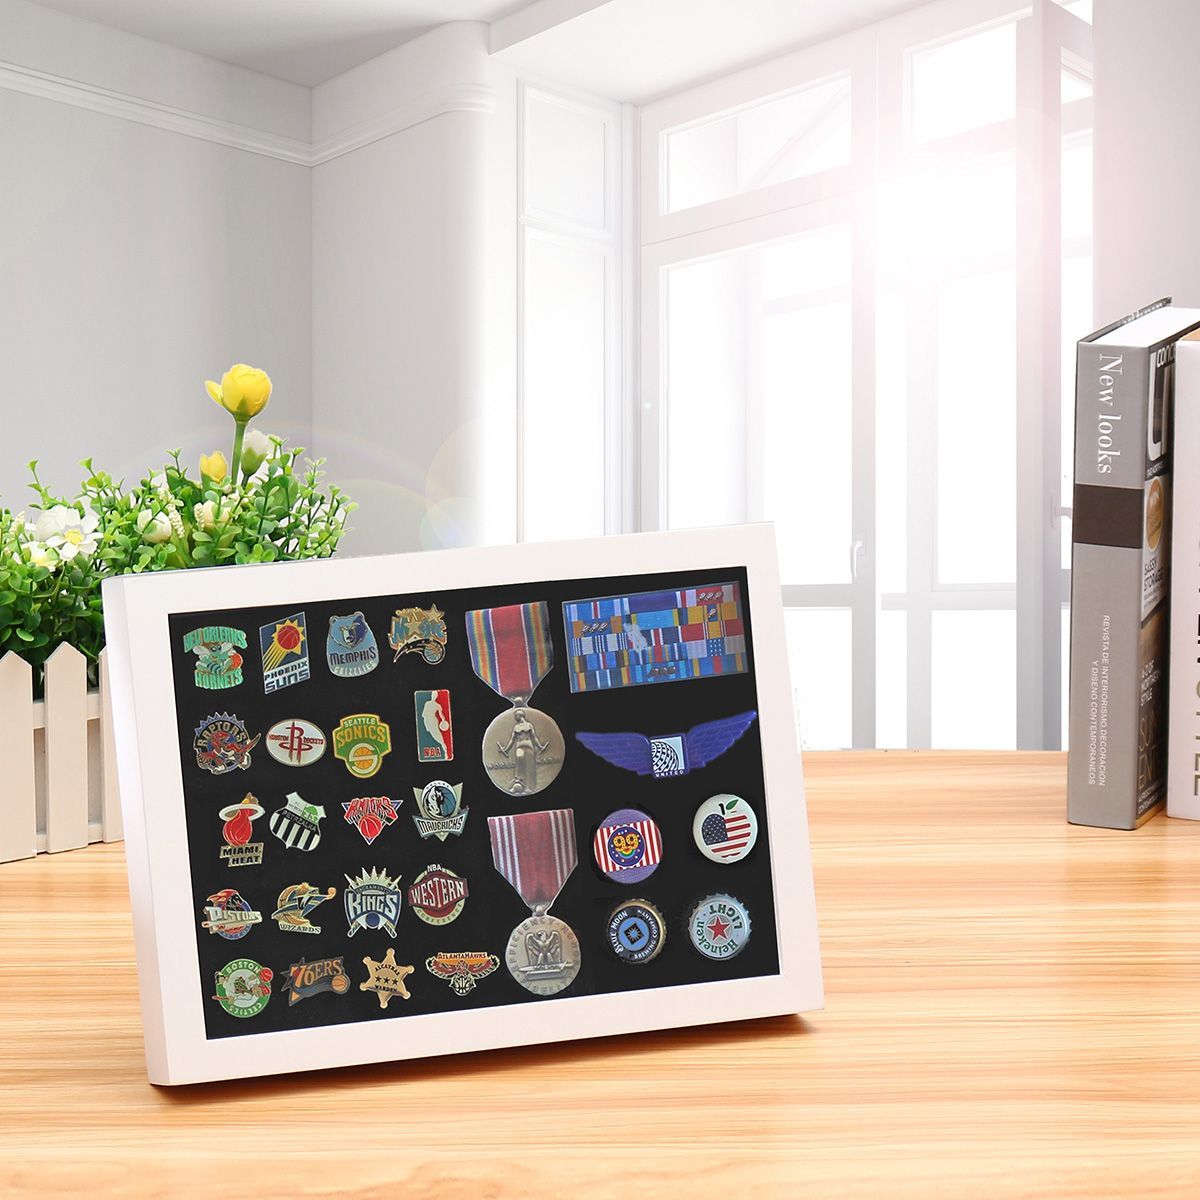 Pin-Medal-Wooden-Display-Case-Storage-Frame-Box-for-Wall-Hanging-Desktop-Decorations-1599784